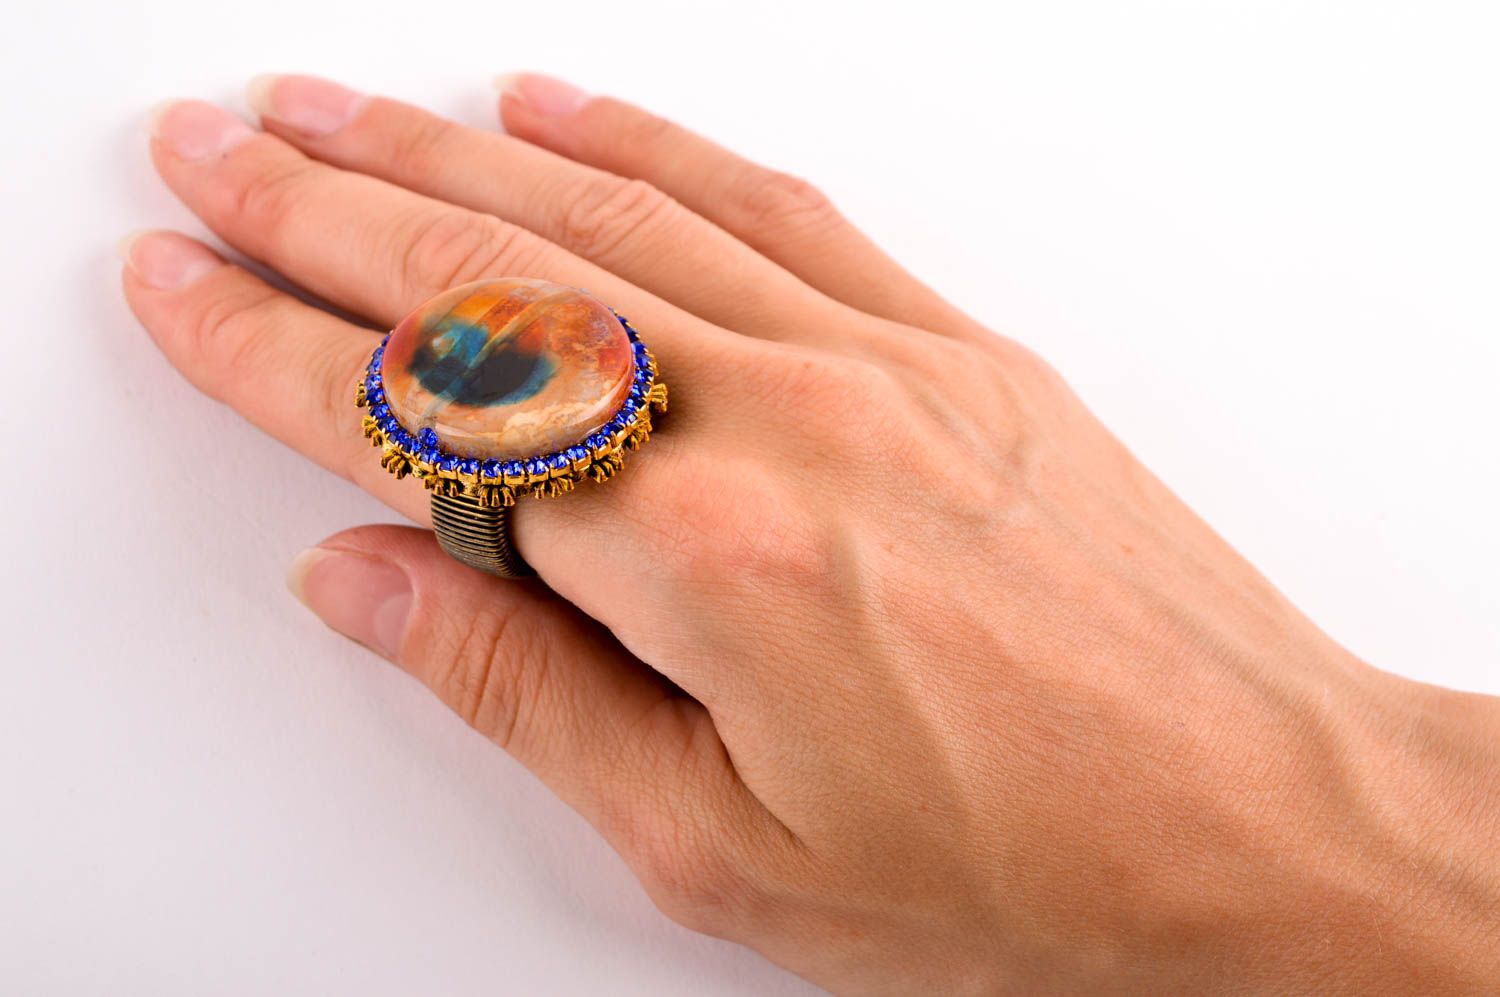 Handmade ring designer ring with stone unusual accessory gift ideas unusual ring photo 4